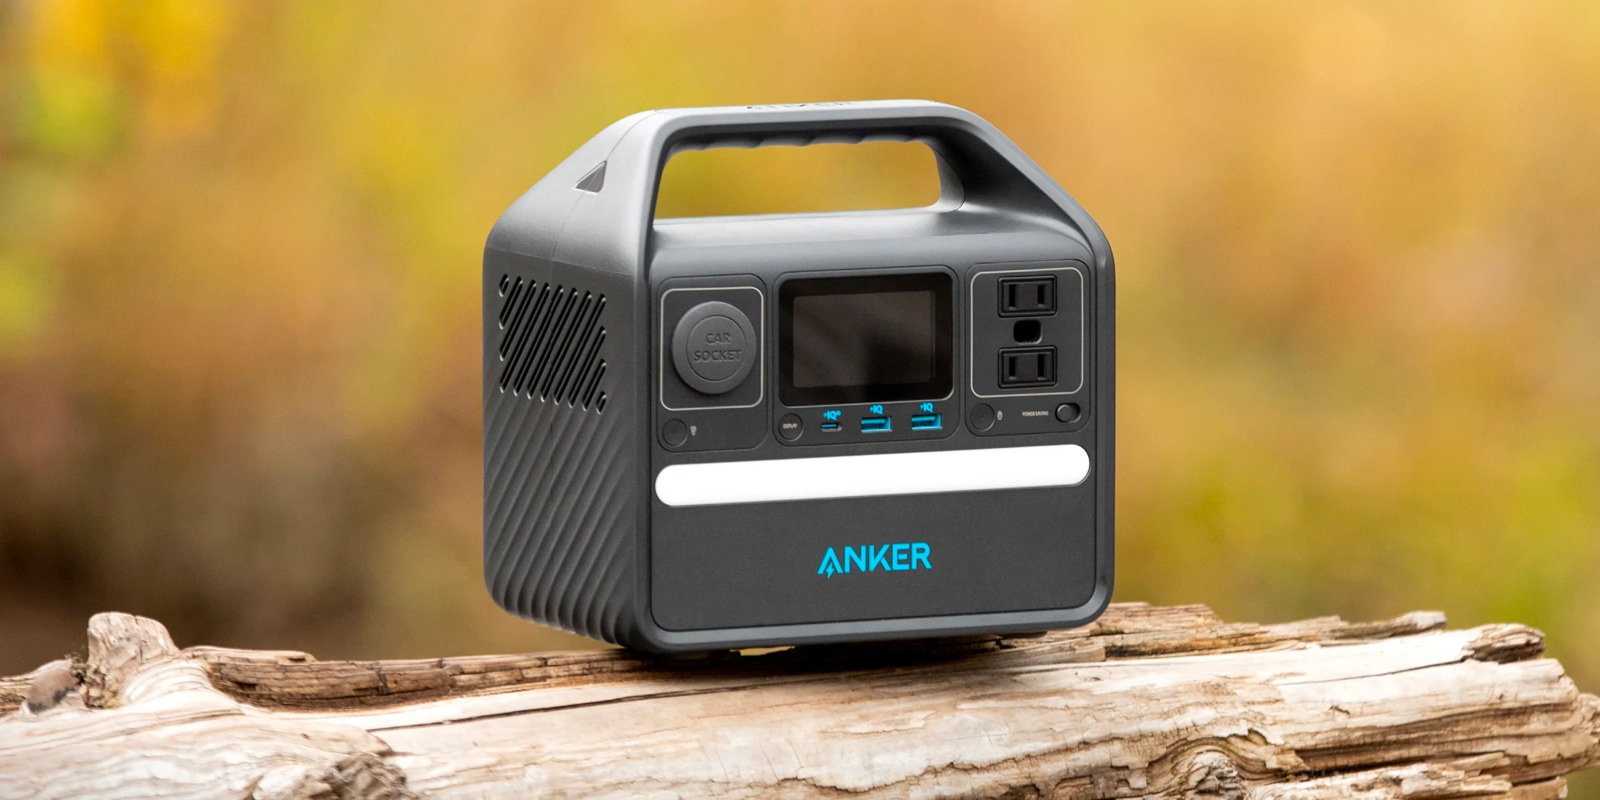 Anker’s PowerHouse 521 power station is down to its lowest price ever on Amazon